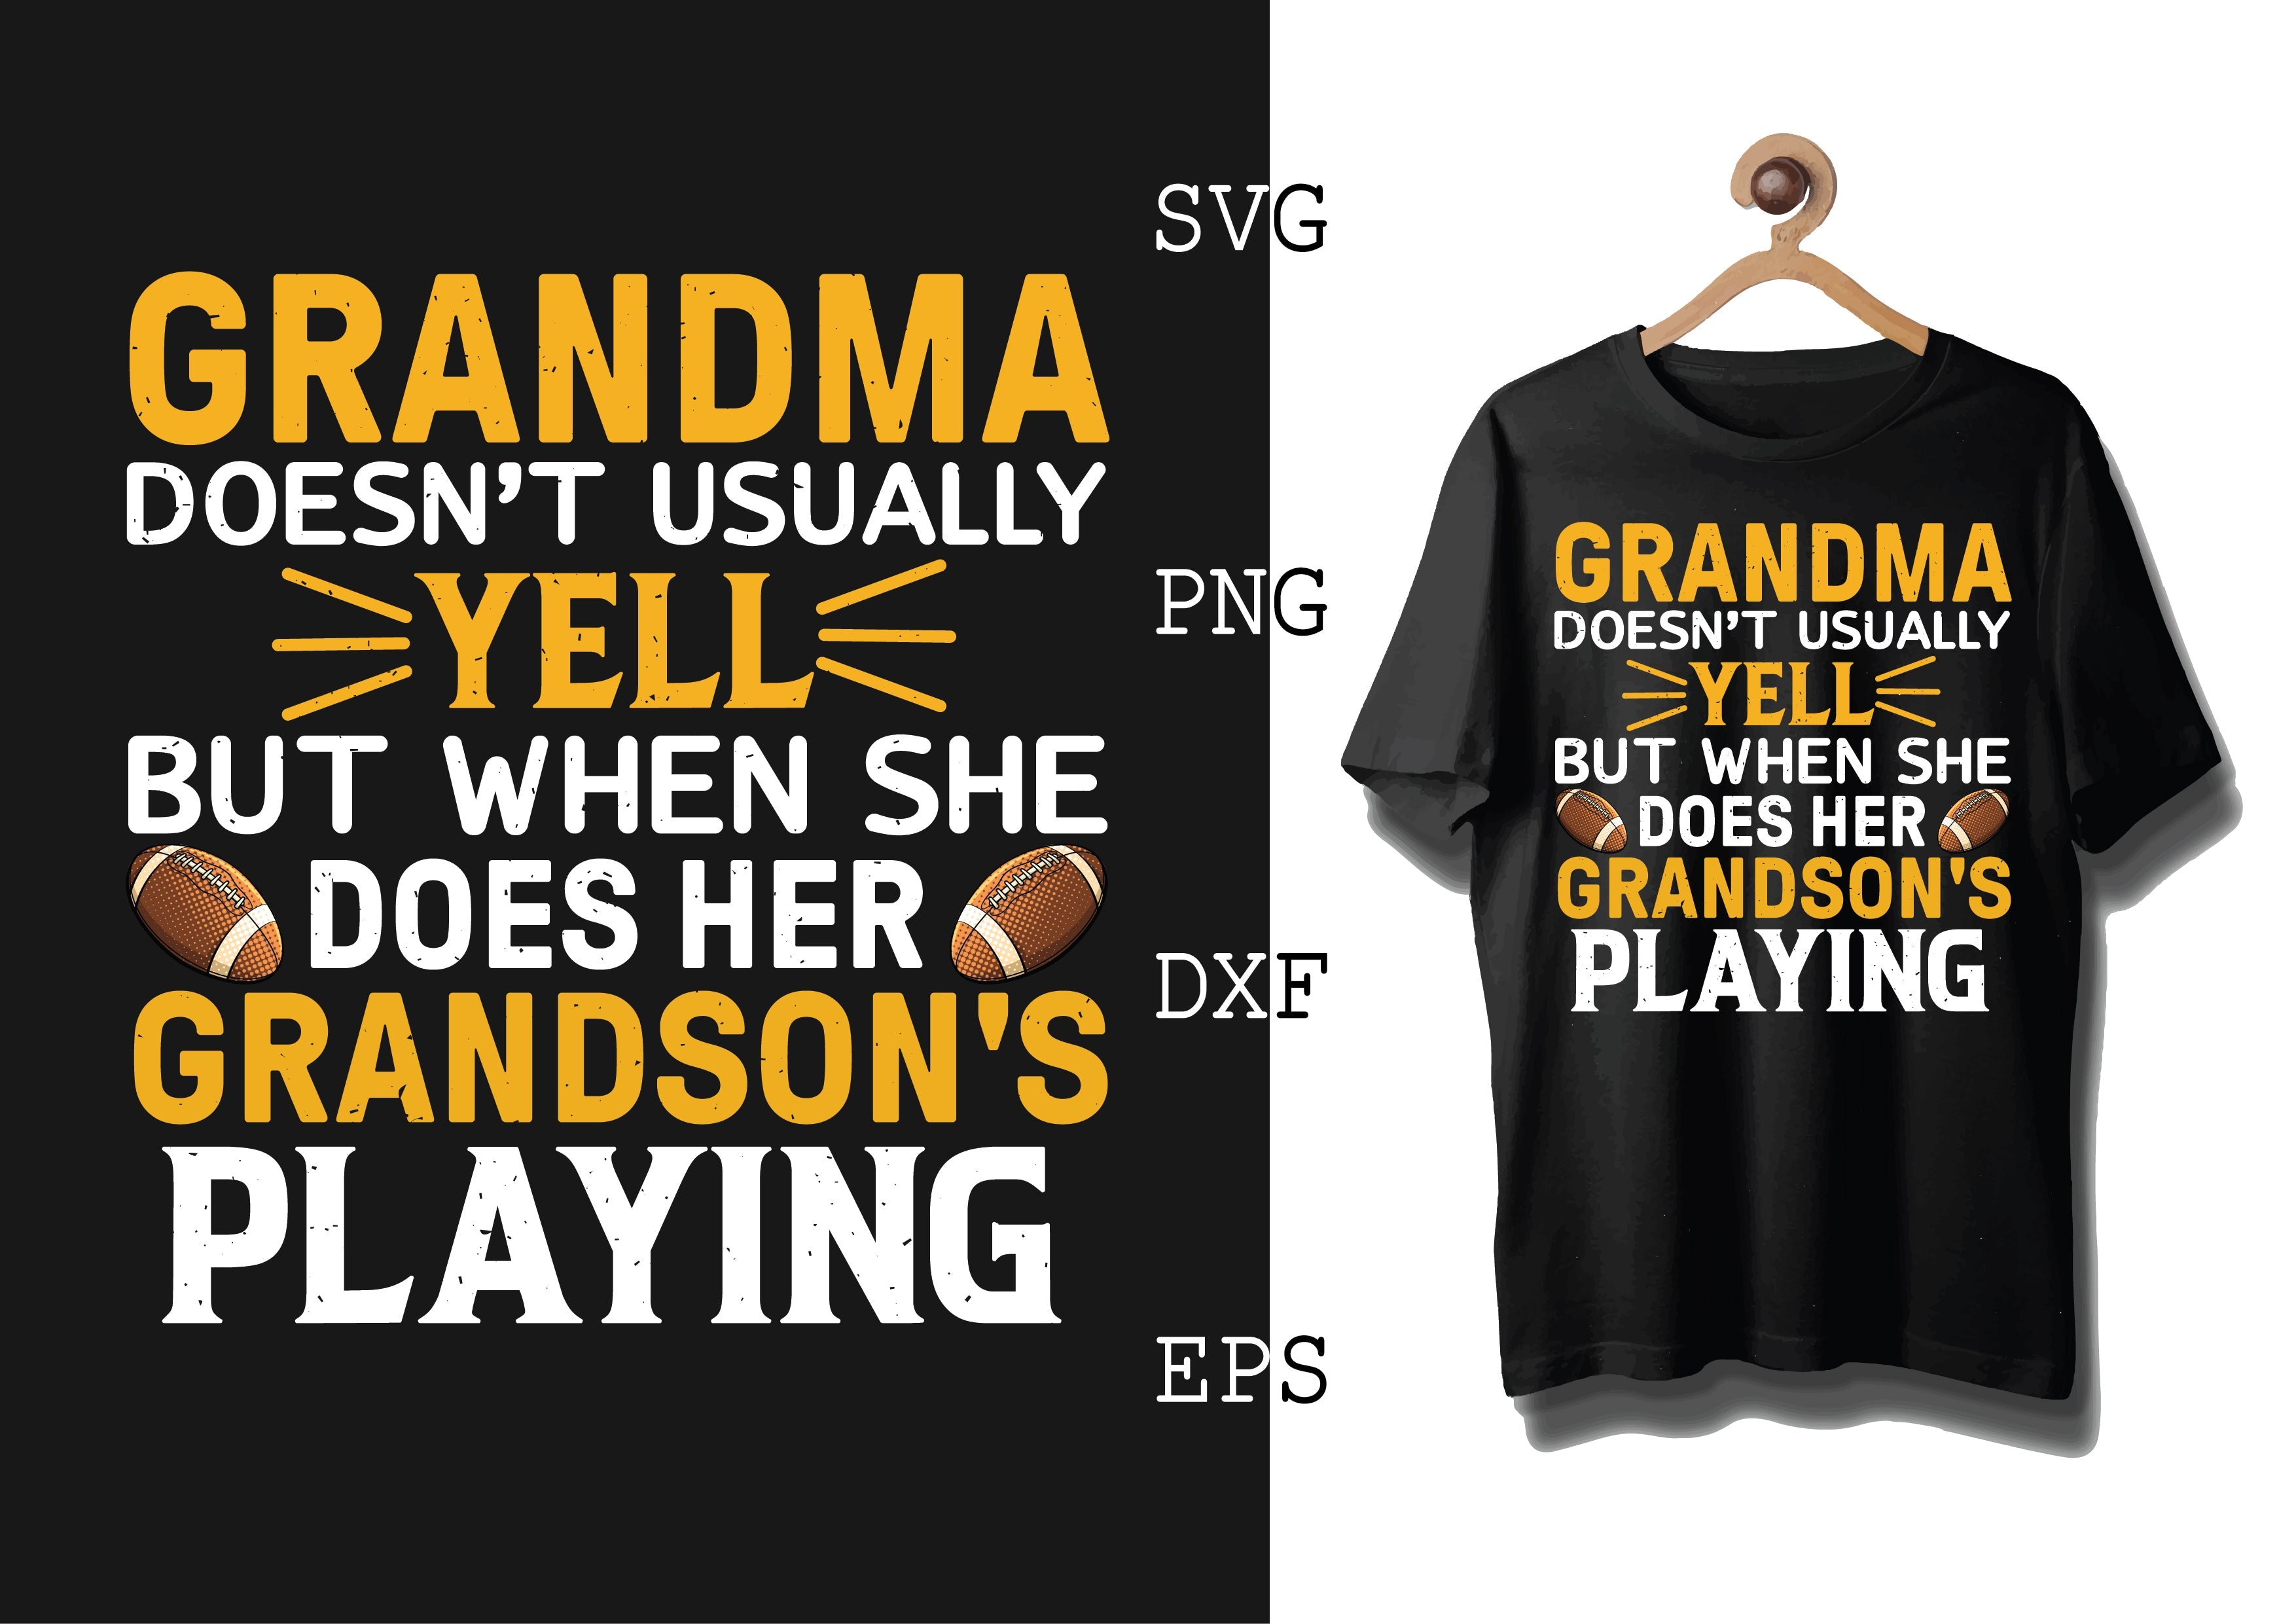 Grandma Doesnt Usually Yell But When She Does Her Grandson's Playing ...